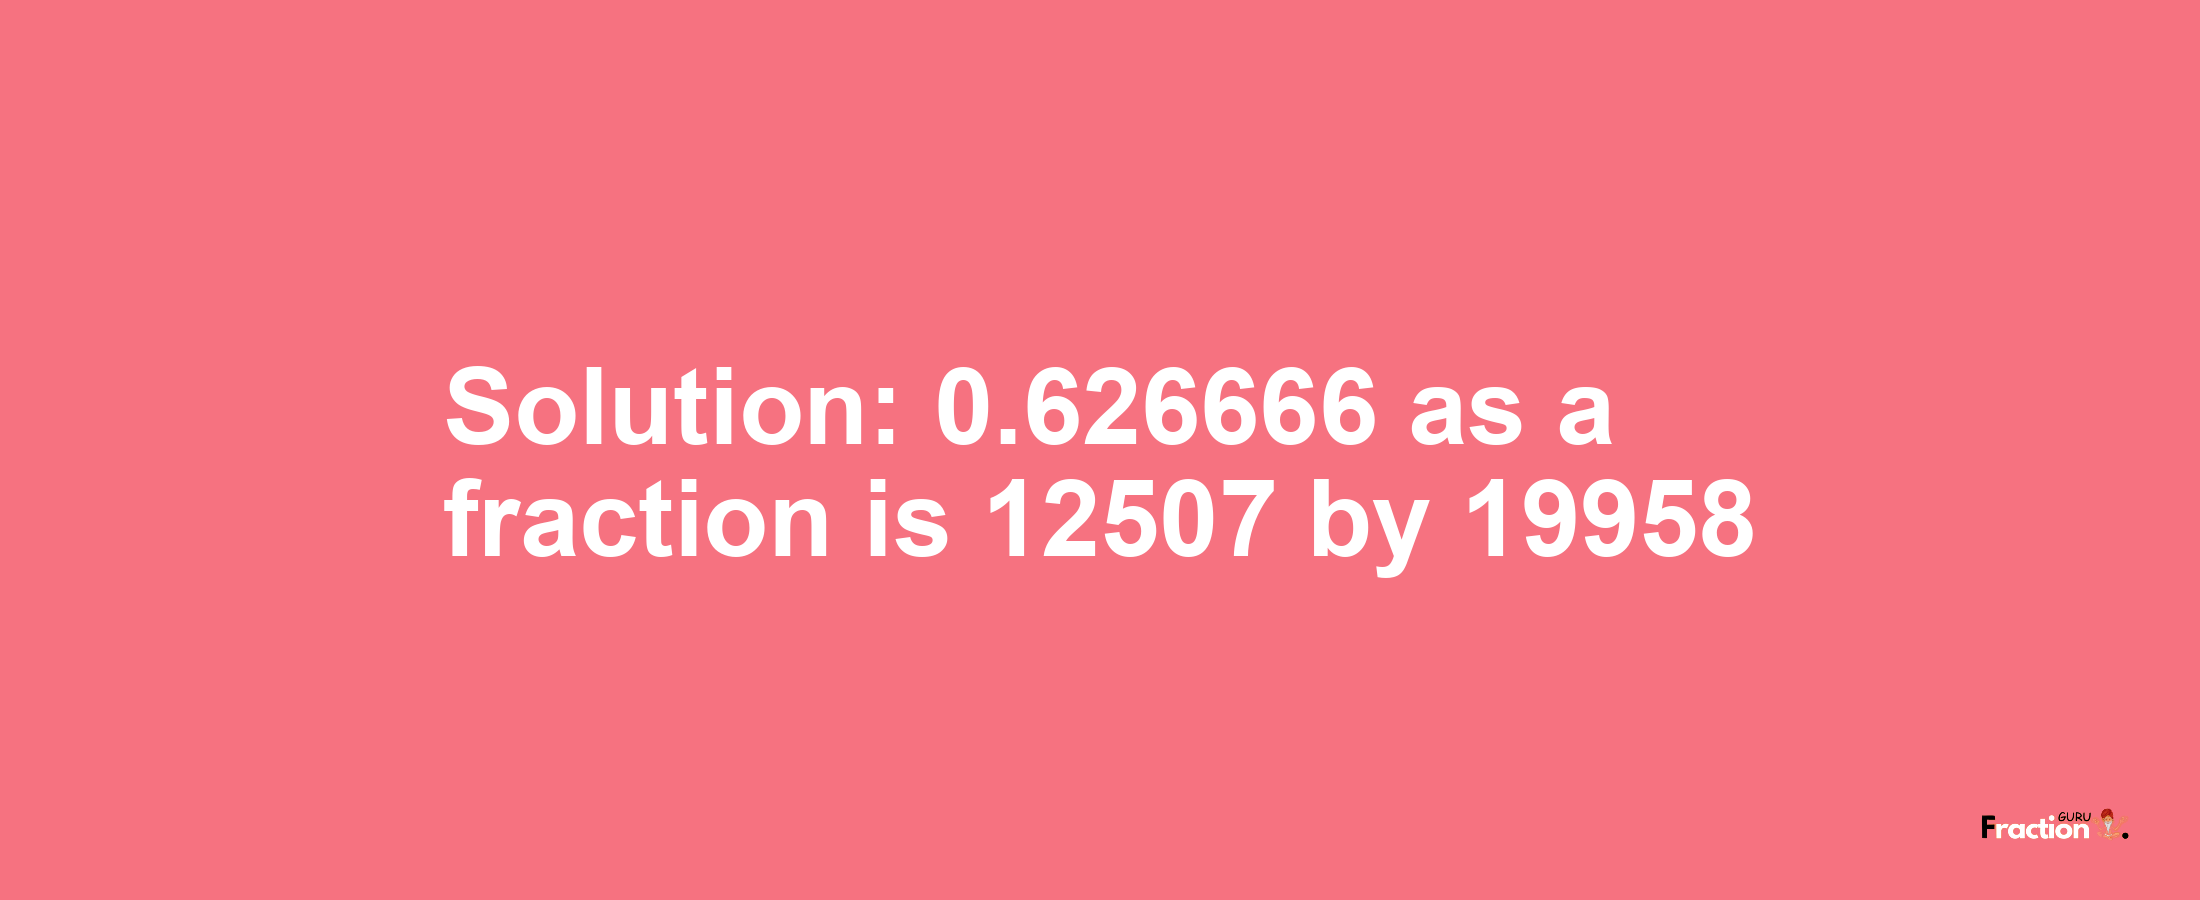 Solution:0.626666 as a fraction is 12507/19958